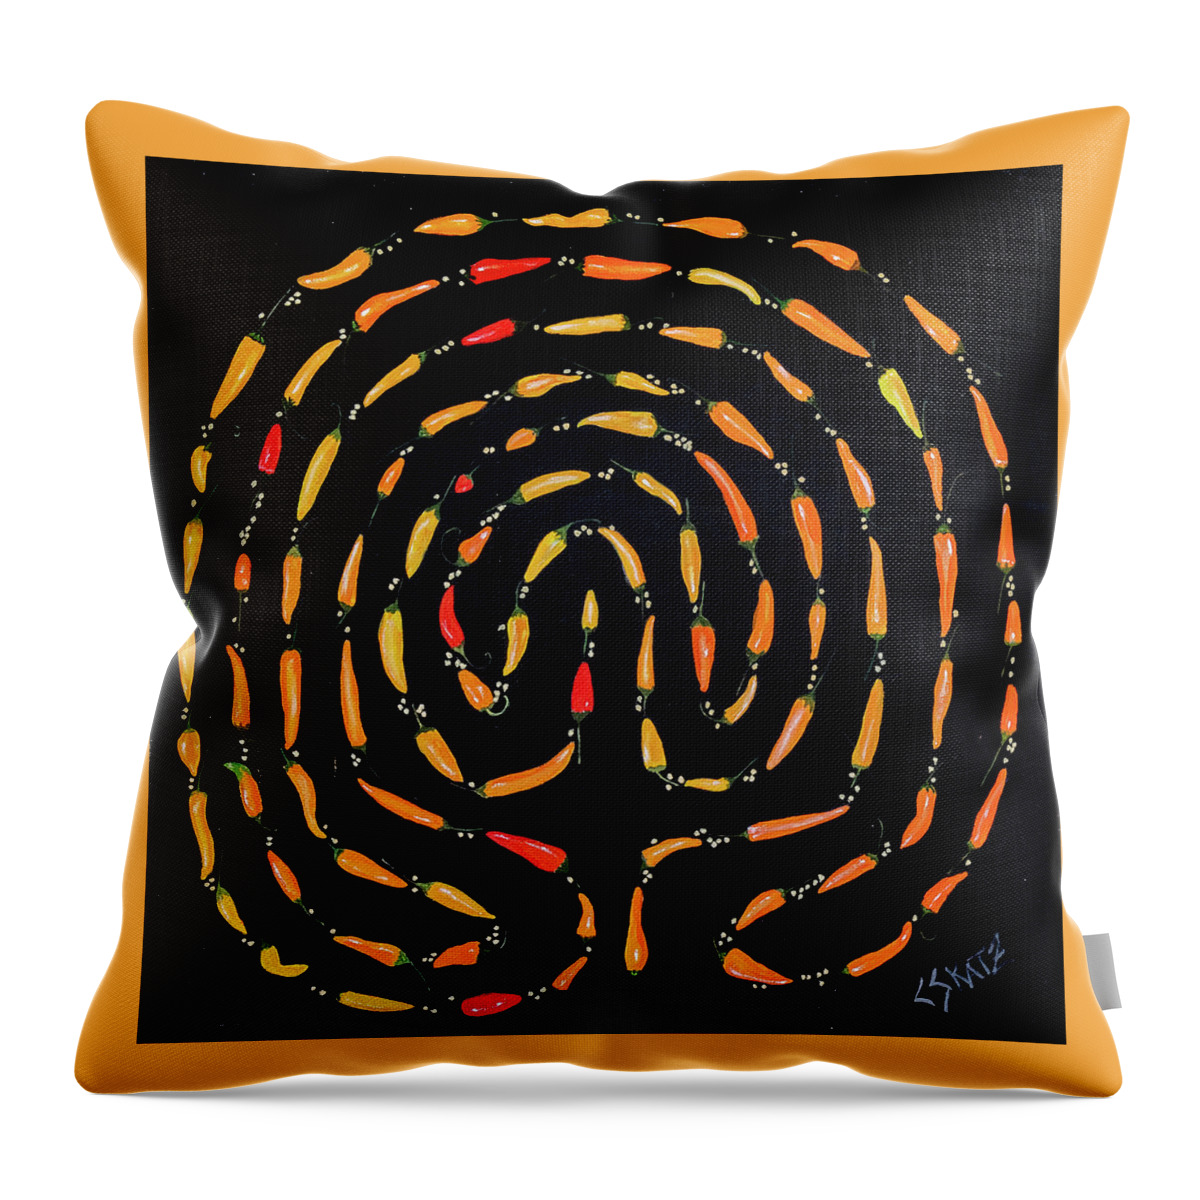 Chilis Throw Pillow featuring the painting 100 Chili Labyrinth by Cyndie Katz